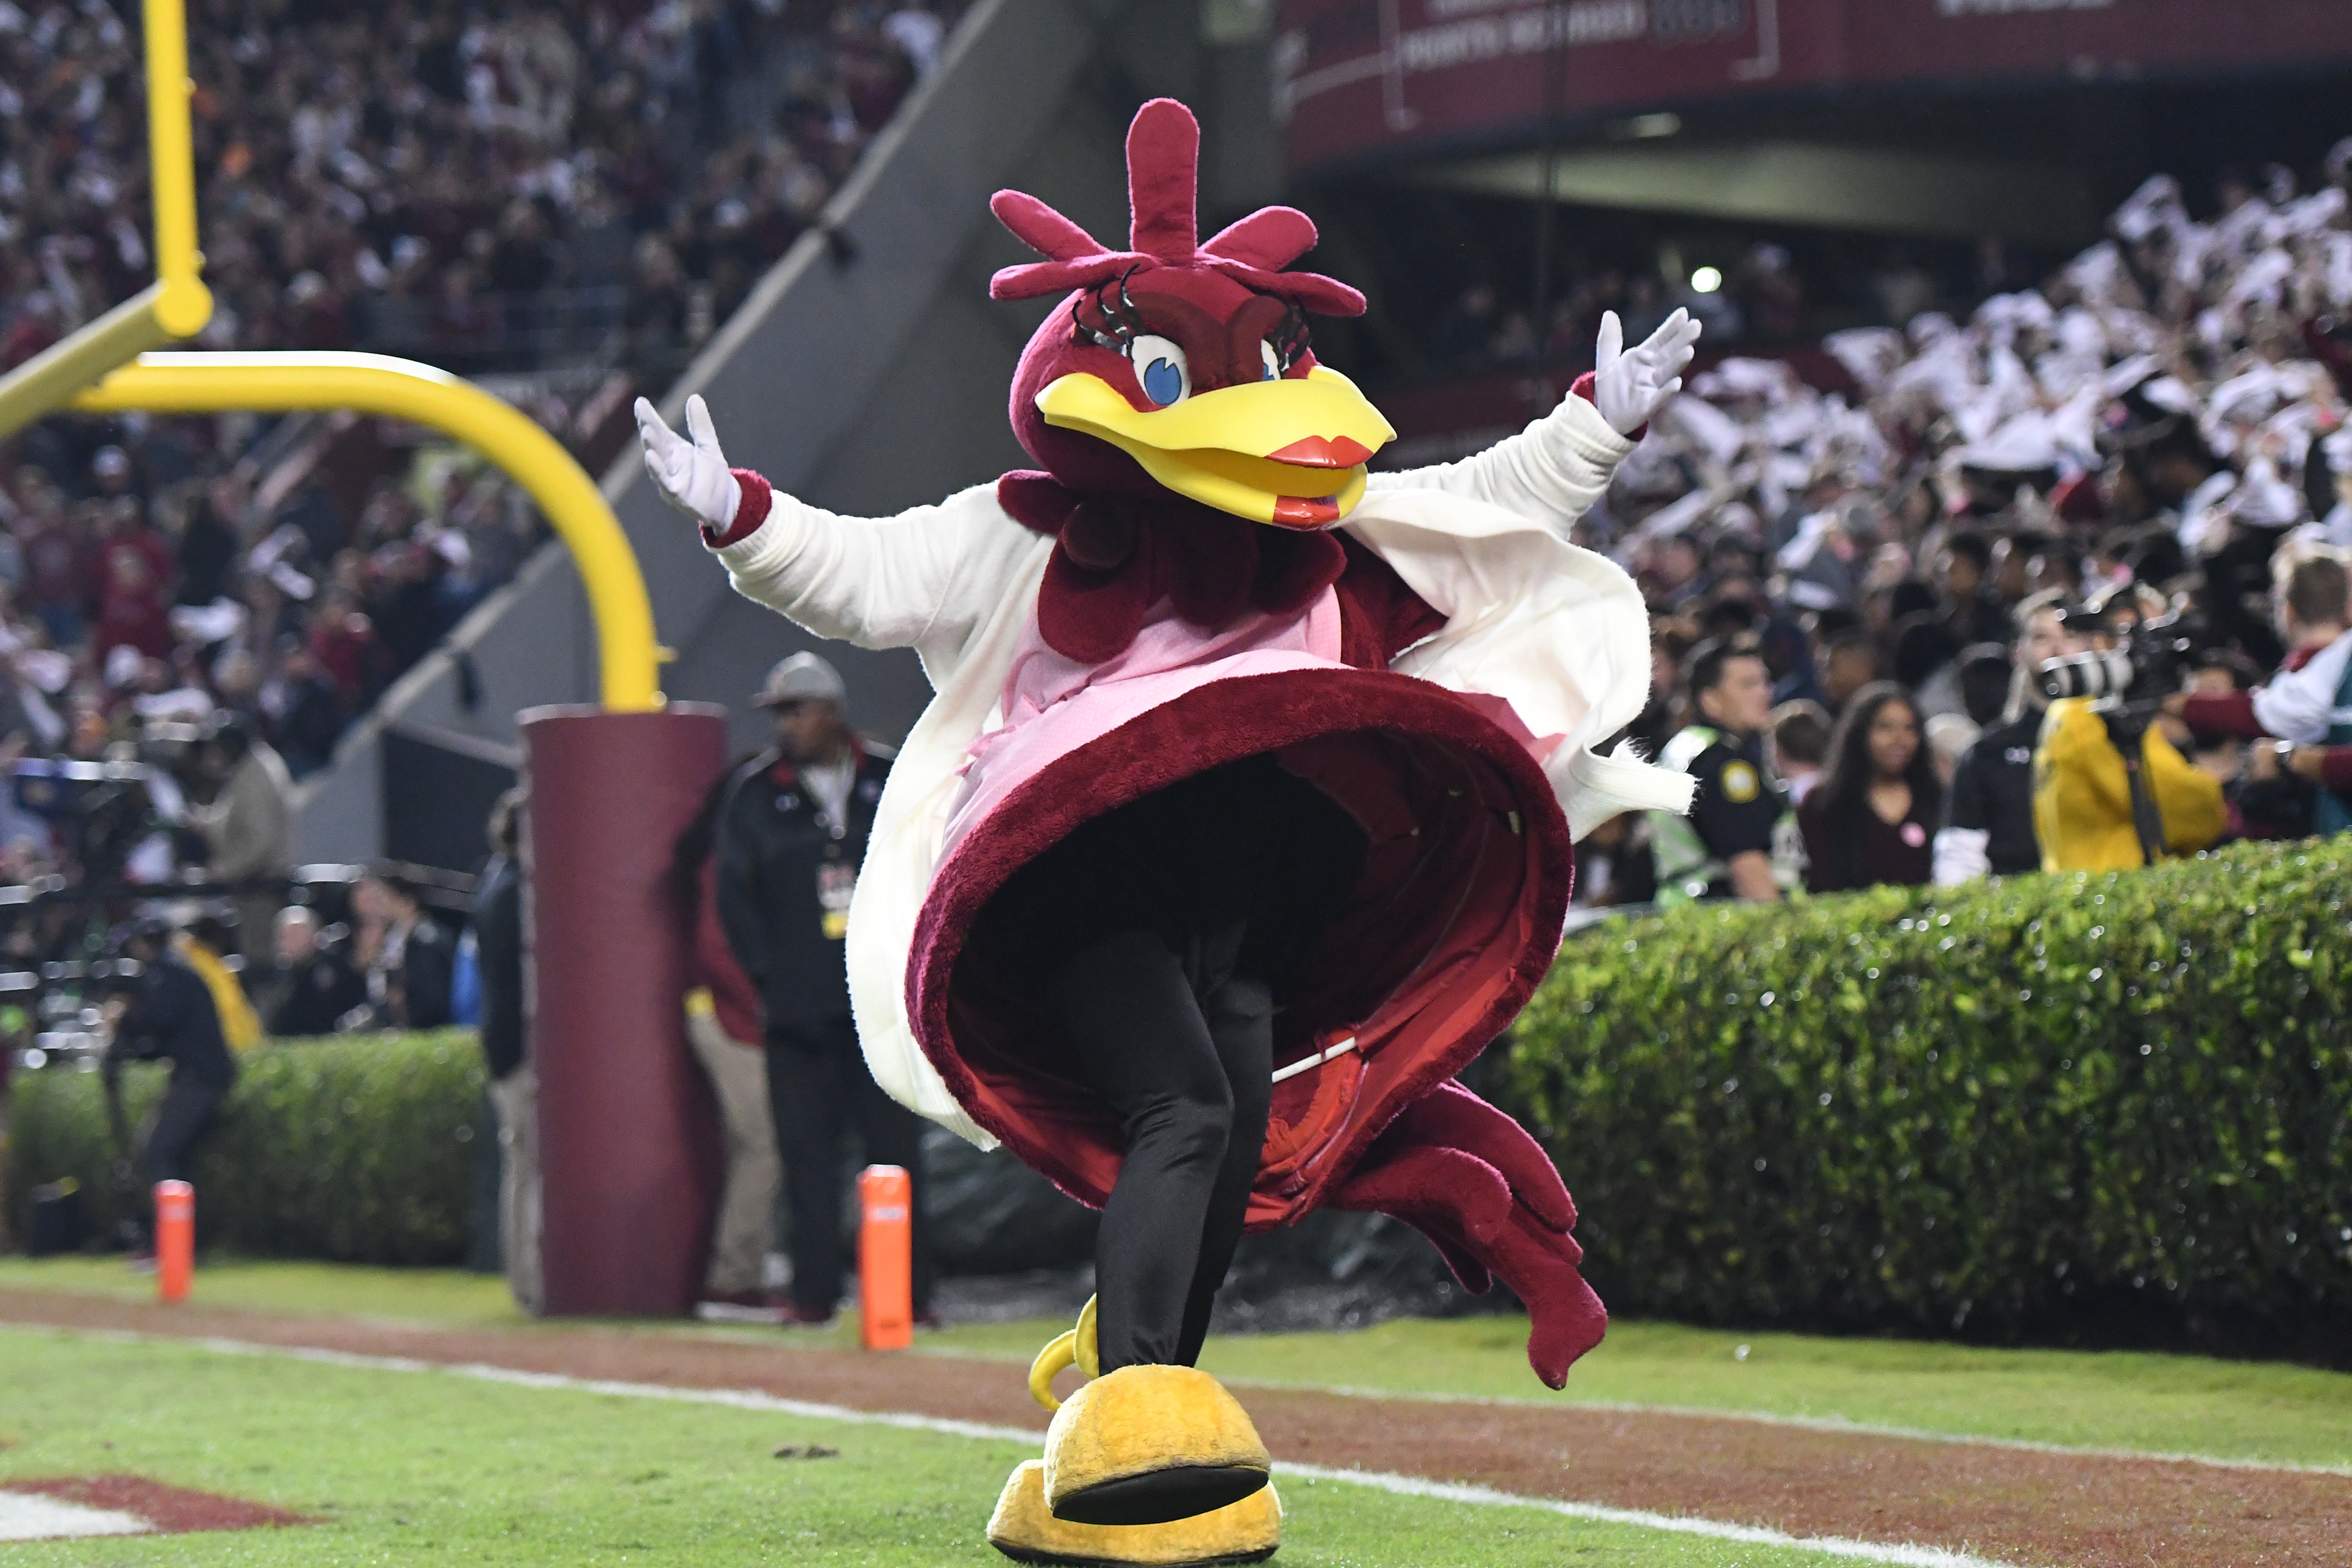 COLLEGE FOOTBALL: OCT 27 Tennessee at South Carolina